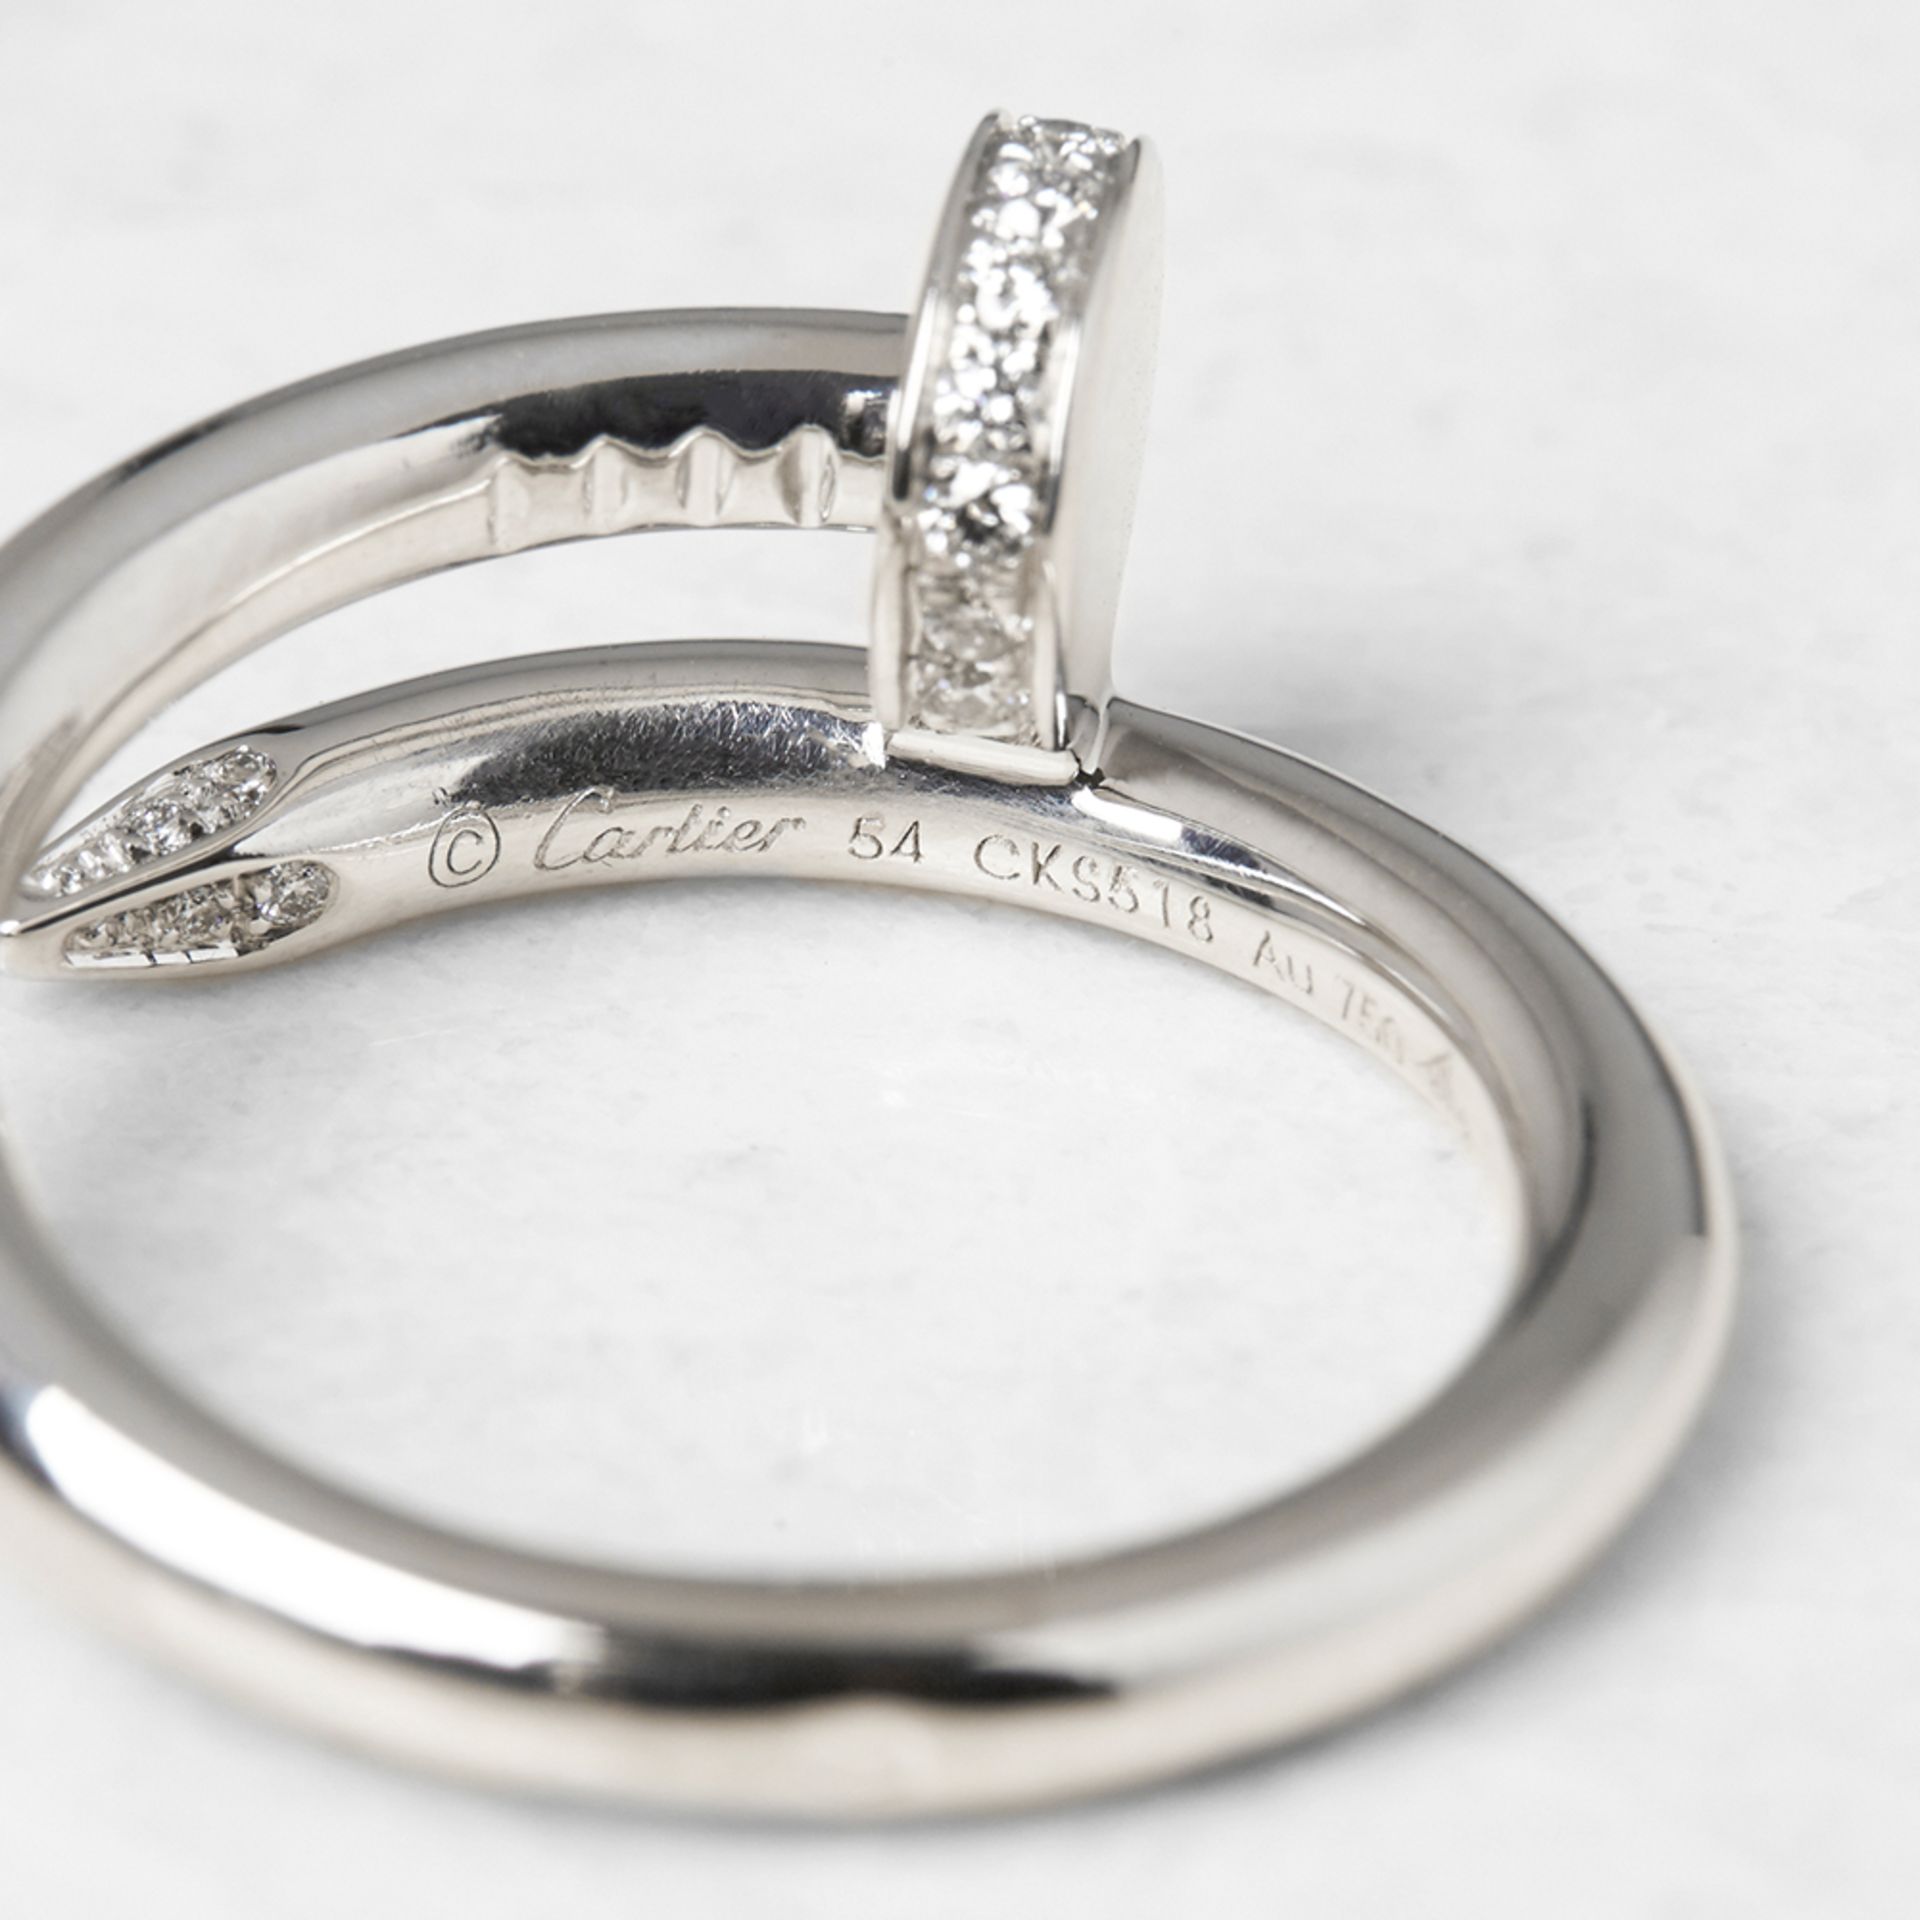 Cartier 18k White Gold Diamond Just Un Clou Ring - Image 6 of 20